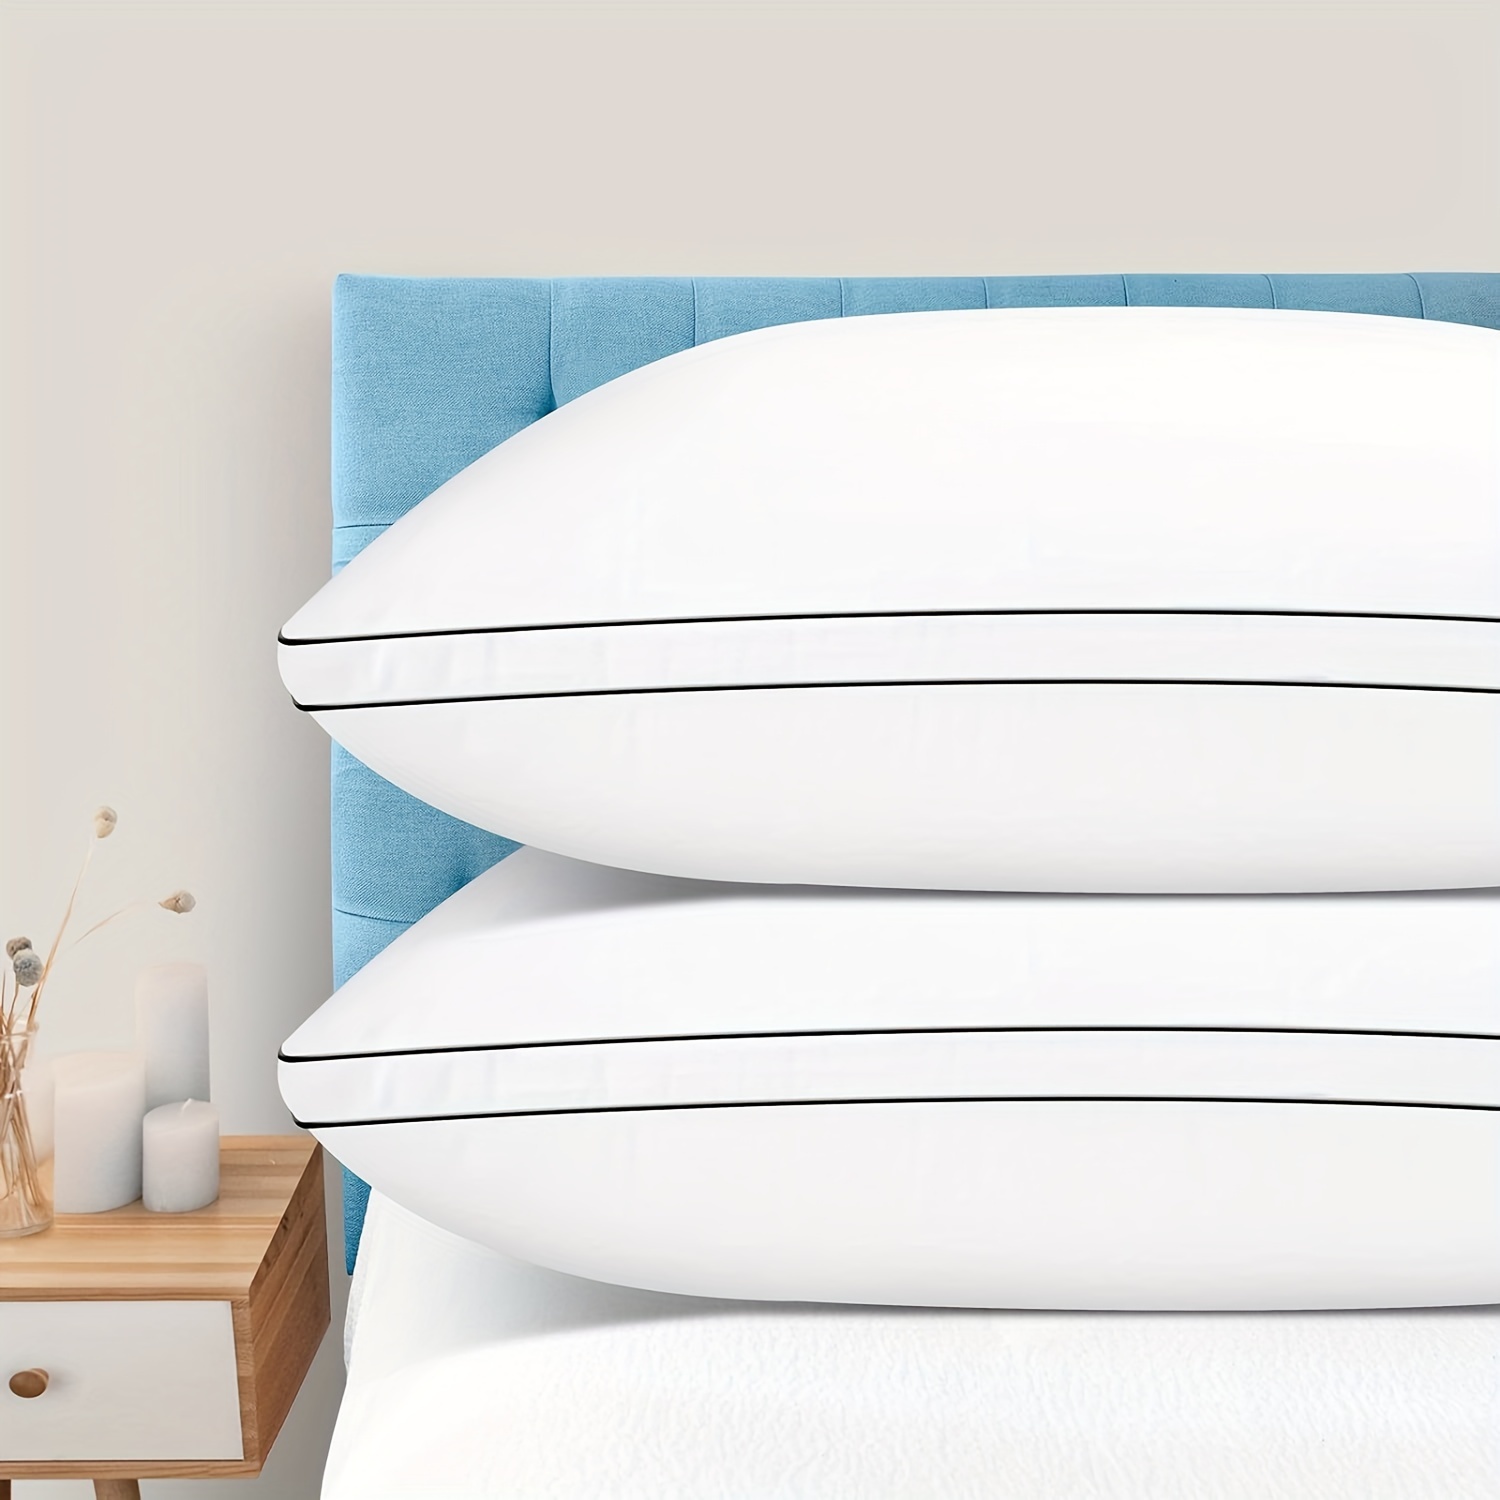 

2-piece Sleep Pillow Cores With Breathable Pillowcase Medium Support For Side, Back, And Abdominal Sleep, Hotel Series